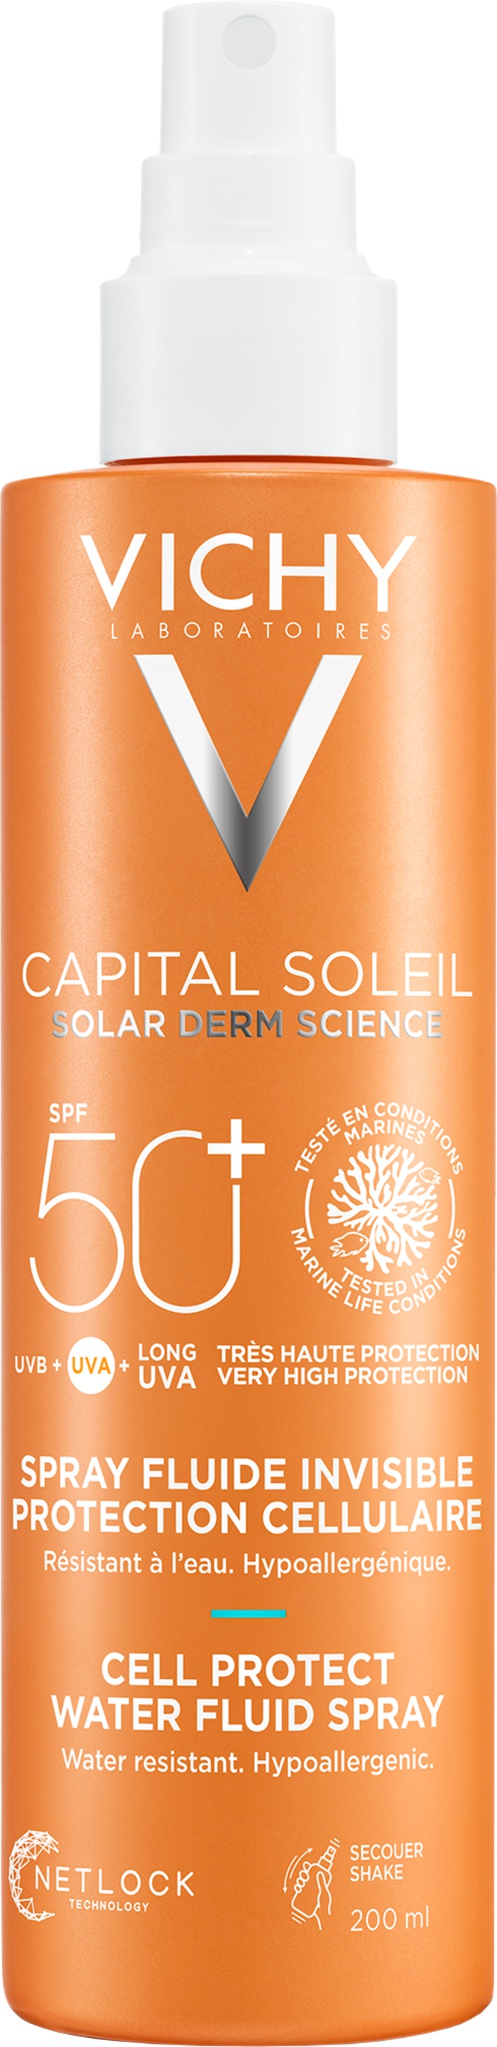 Vichy Capital Soleil Cell Protect Invisible High UVA + UVB Sun Protection Spray SPF 50+